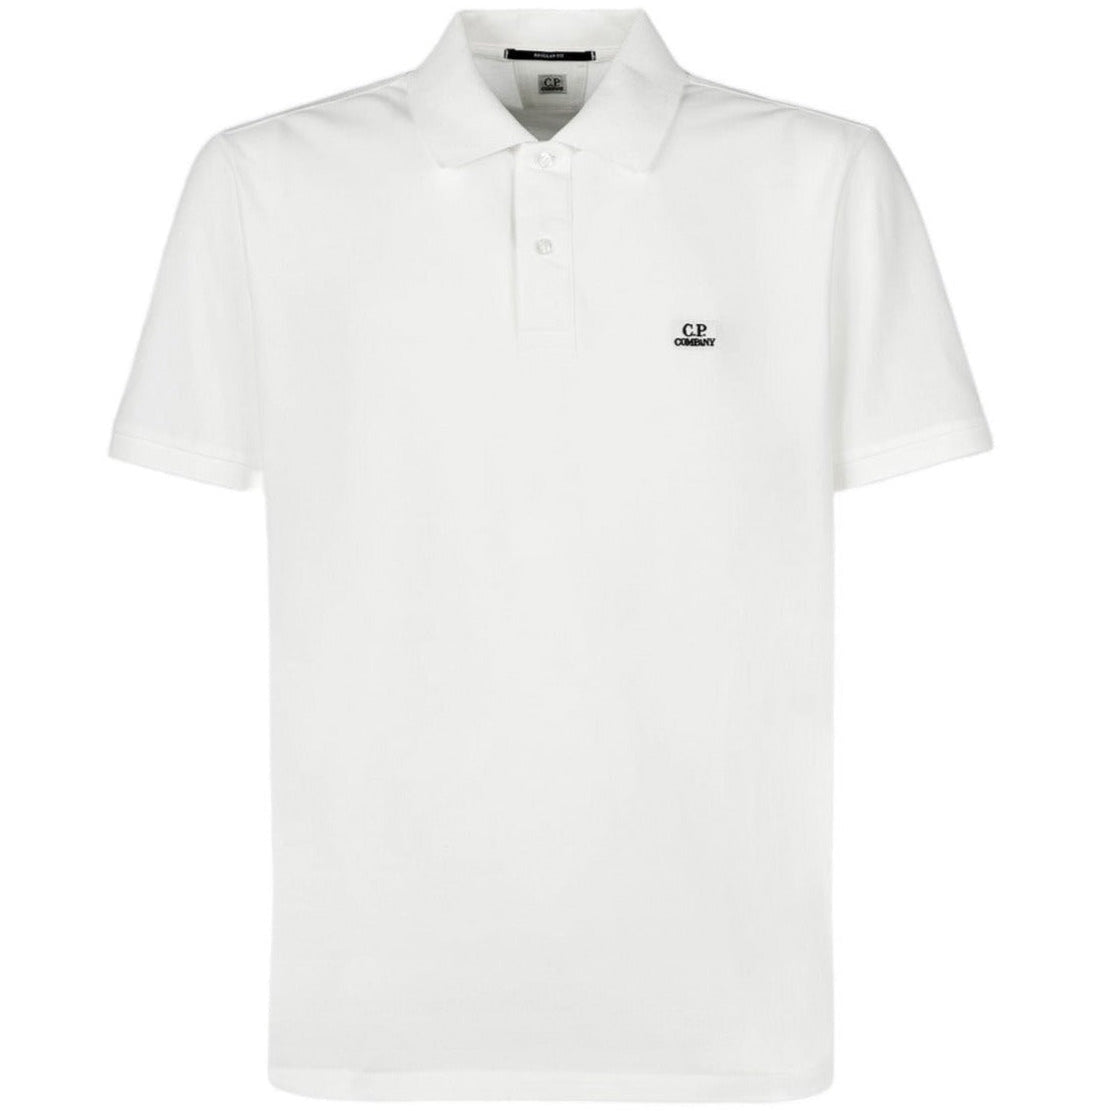 CP Company White Embroidered Polo Shirt - DANYOUNGUK